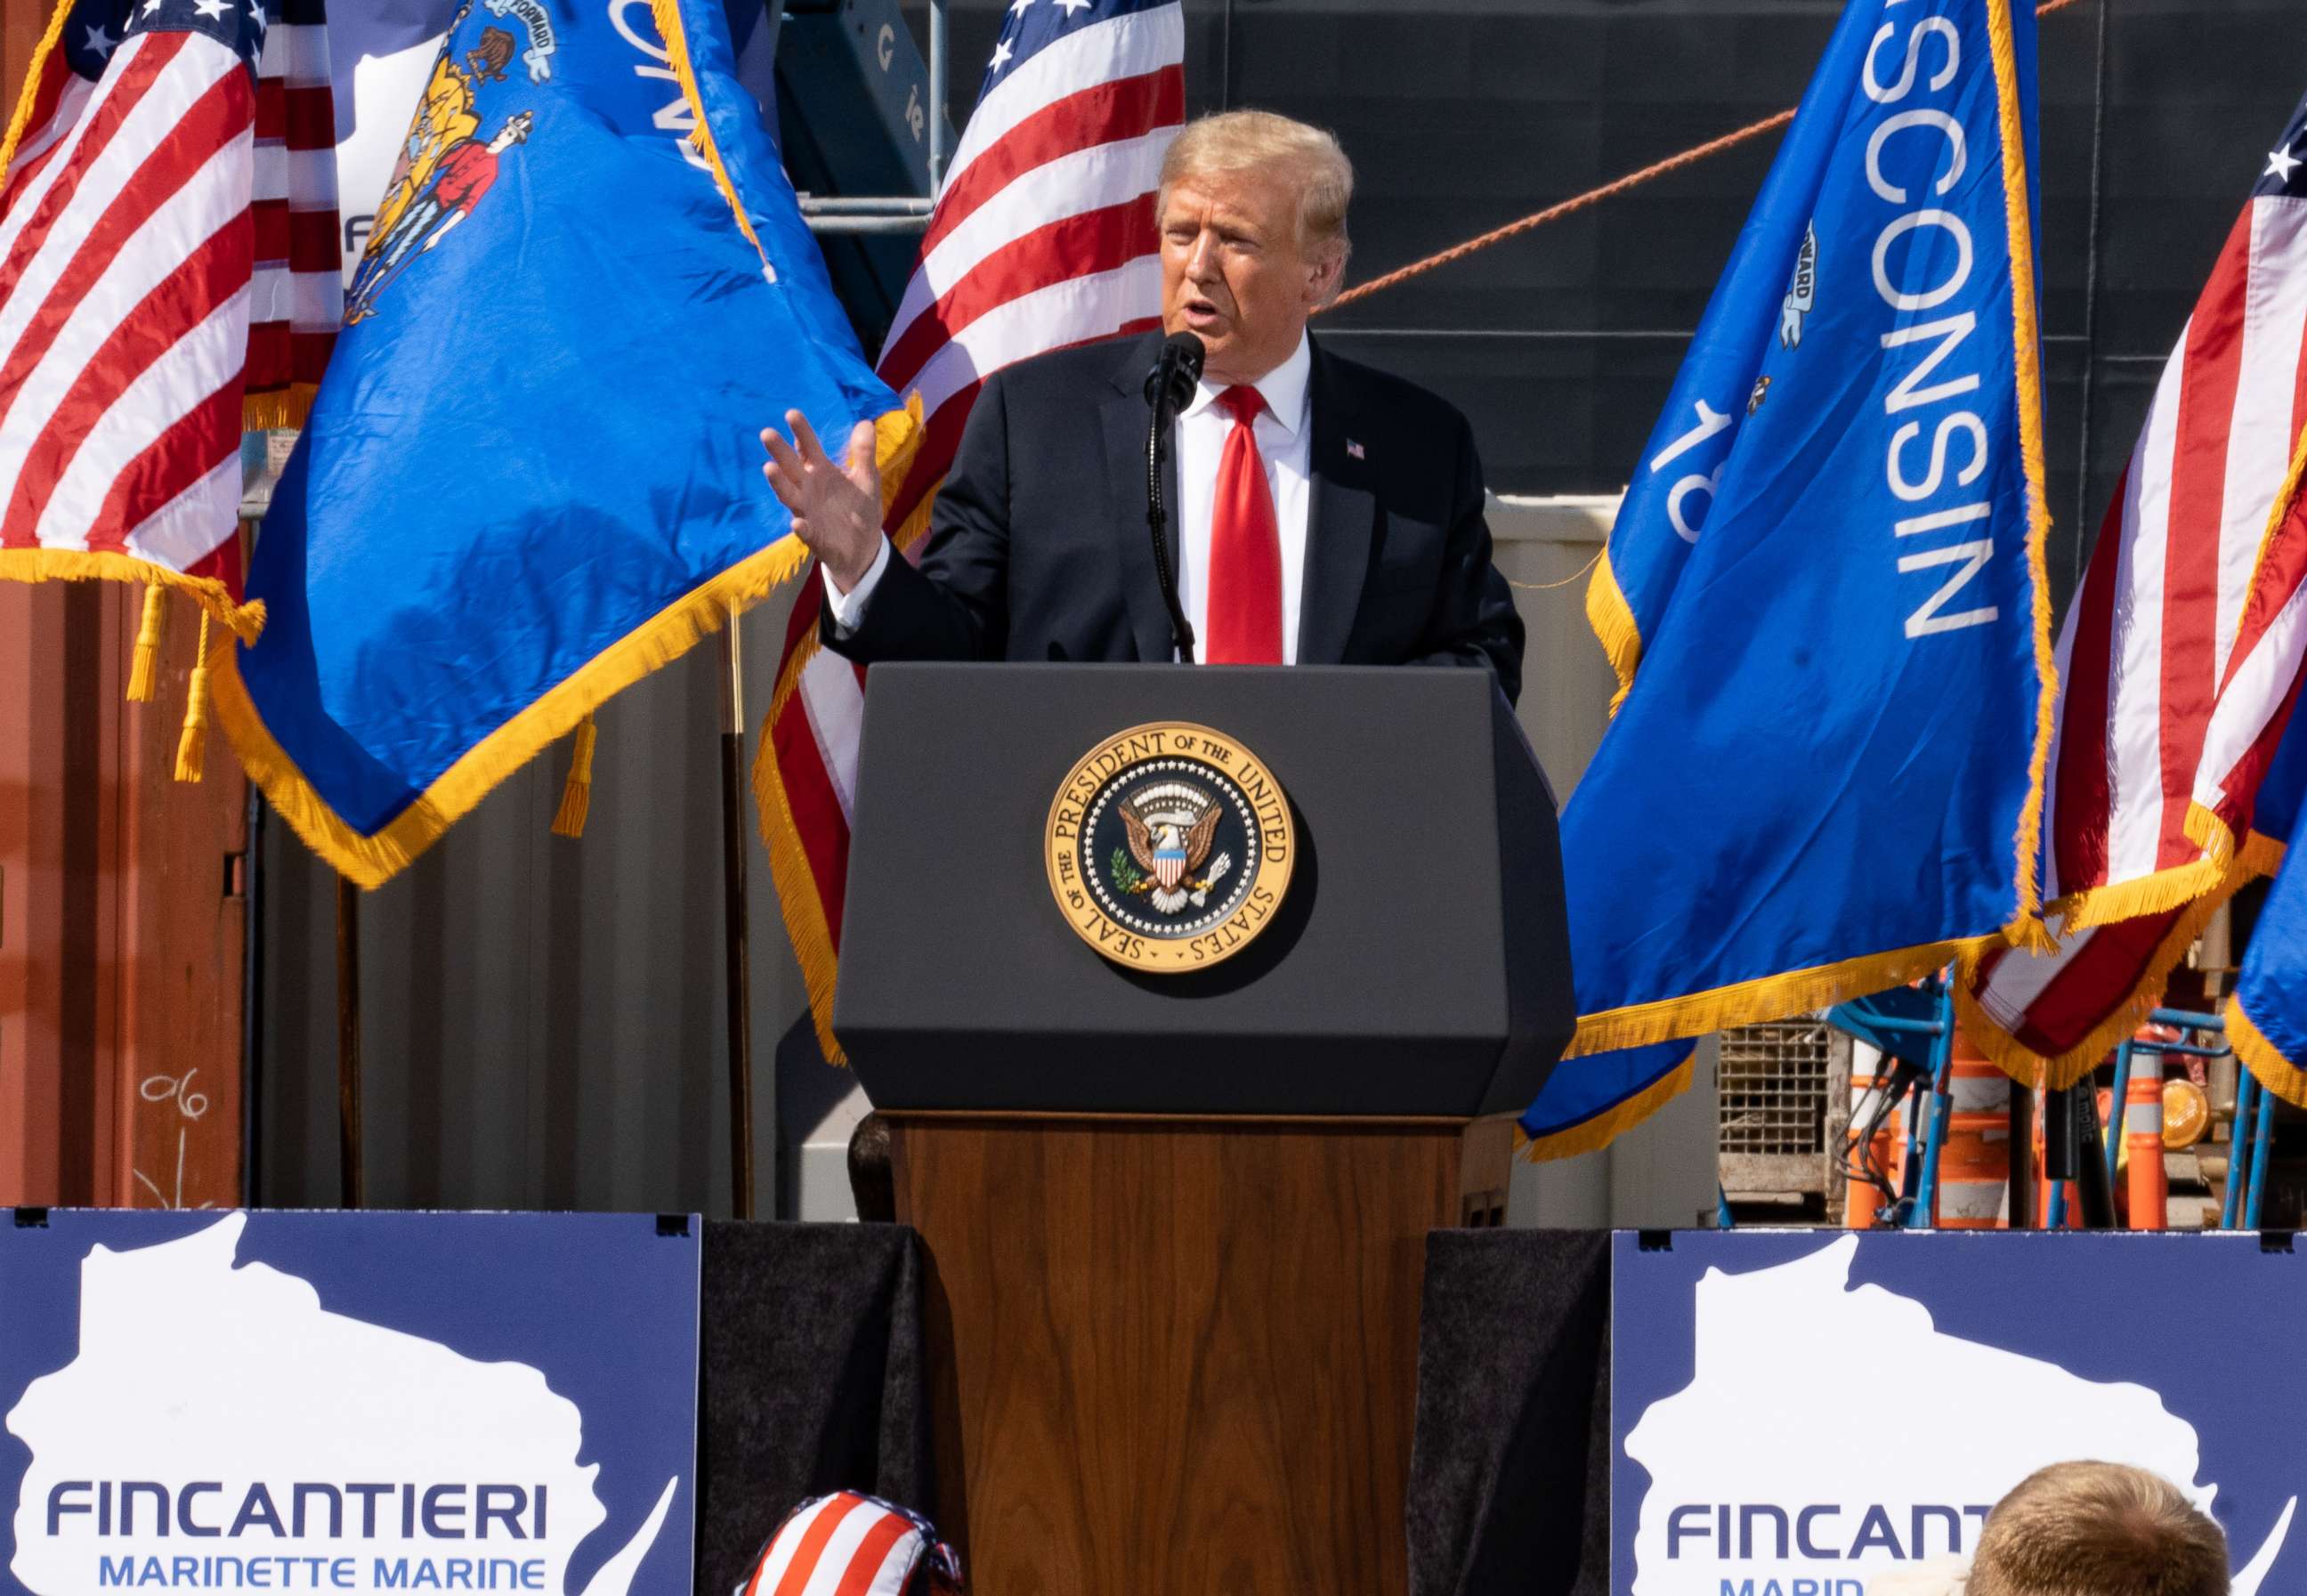 PHOTO: President Donald Trump speaks during an event at the Fincantieri Marinette Marine facility in Marinette, Wisconsin, June 25, 2020.